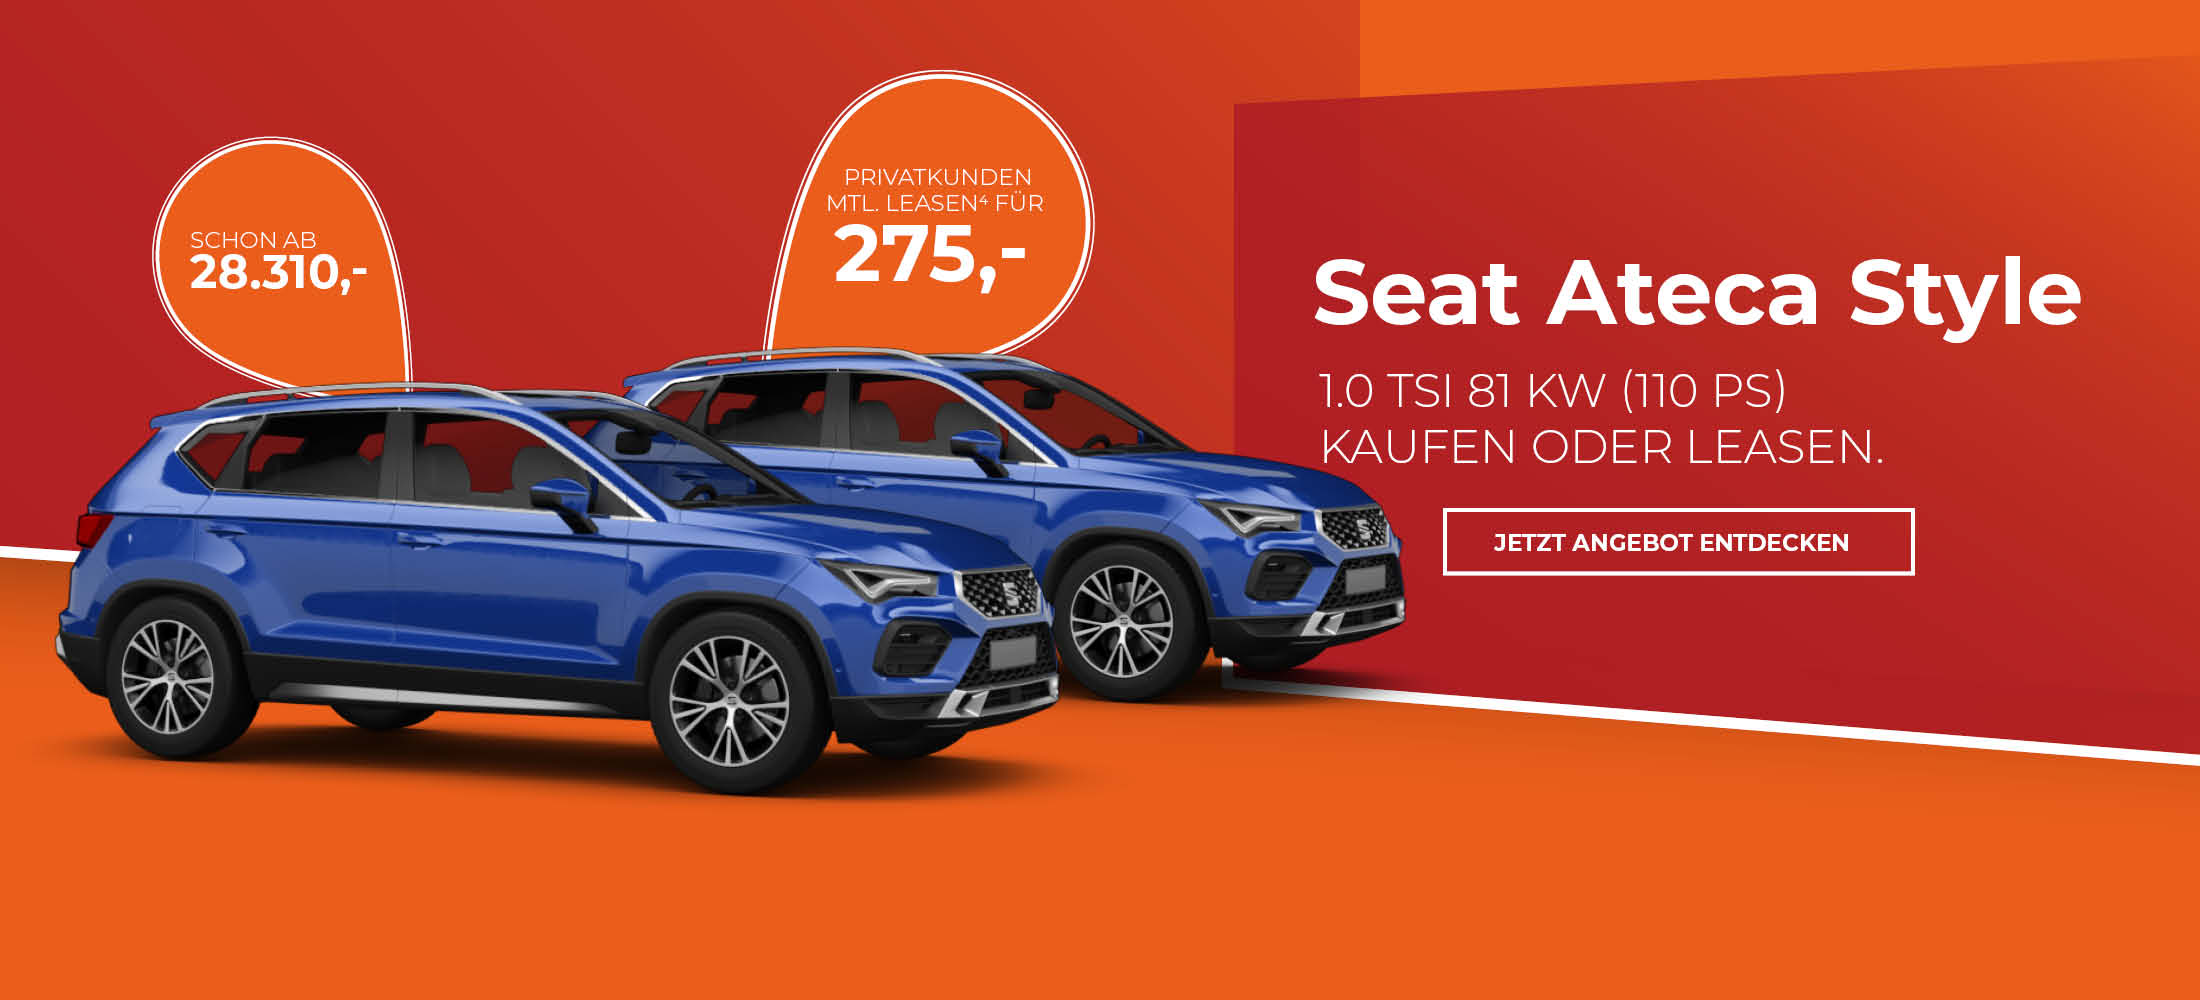 Seat Ateca Sytle